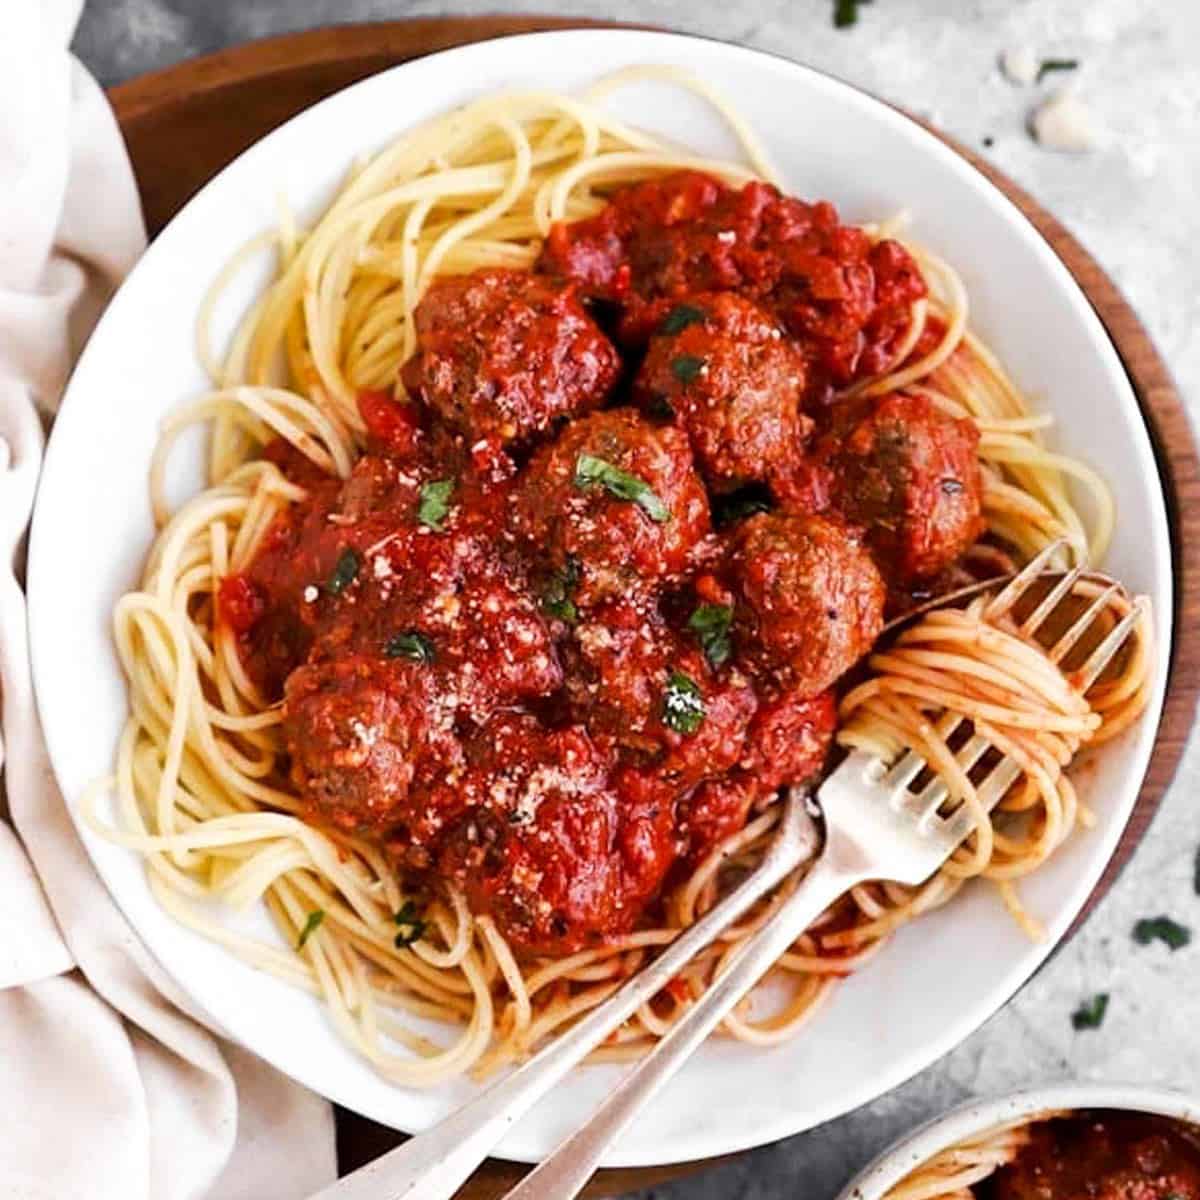 It's Skinny Pasta Review with Meatballs 